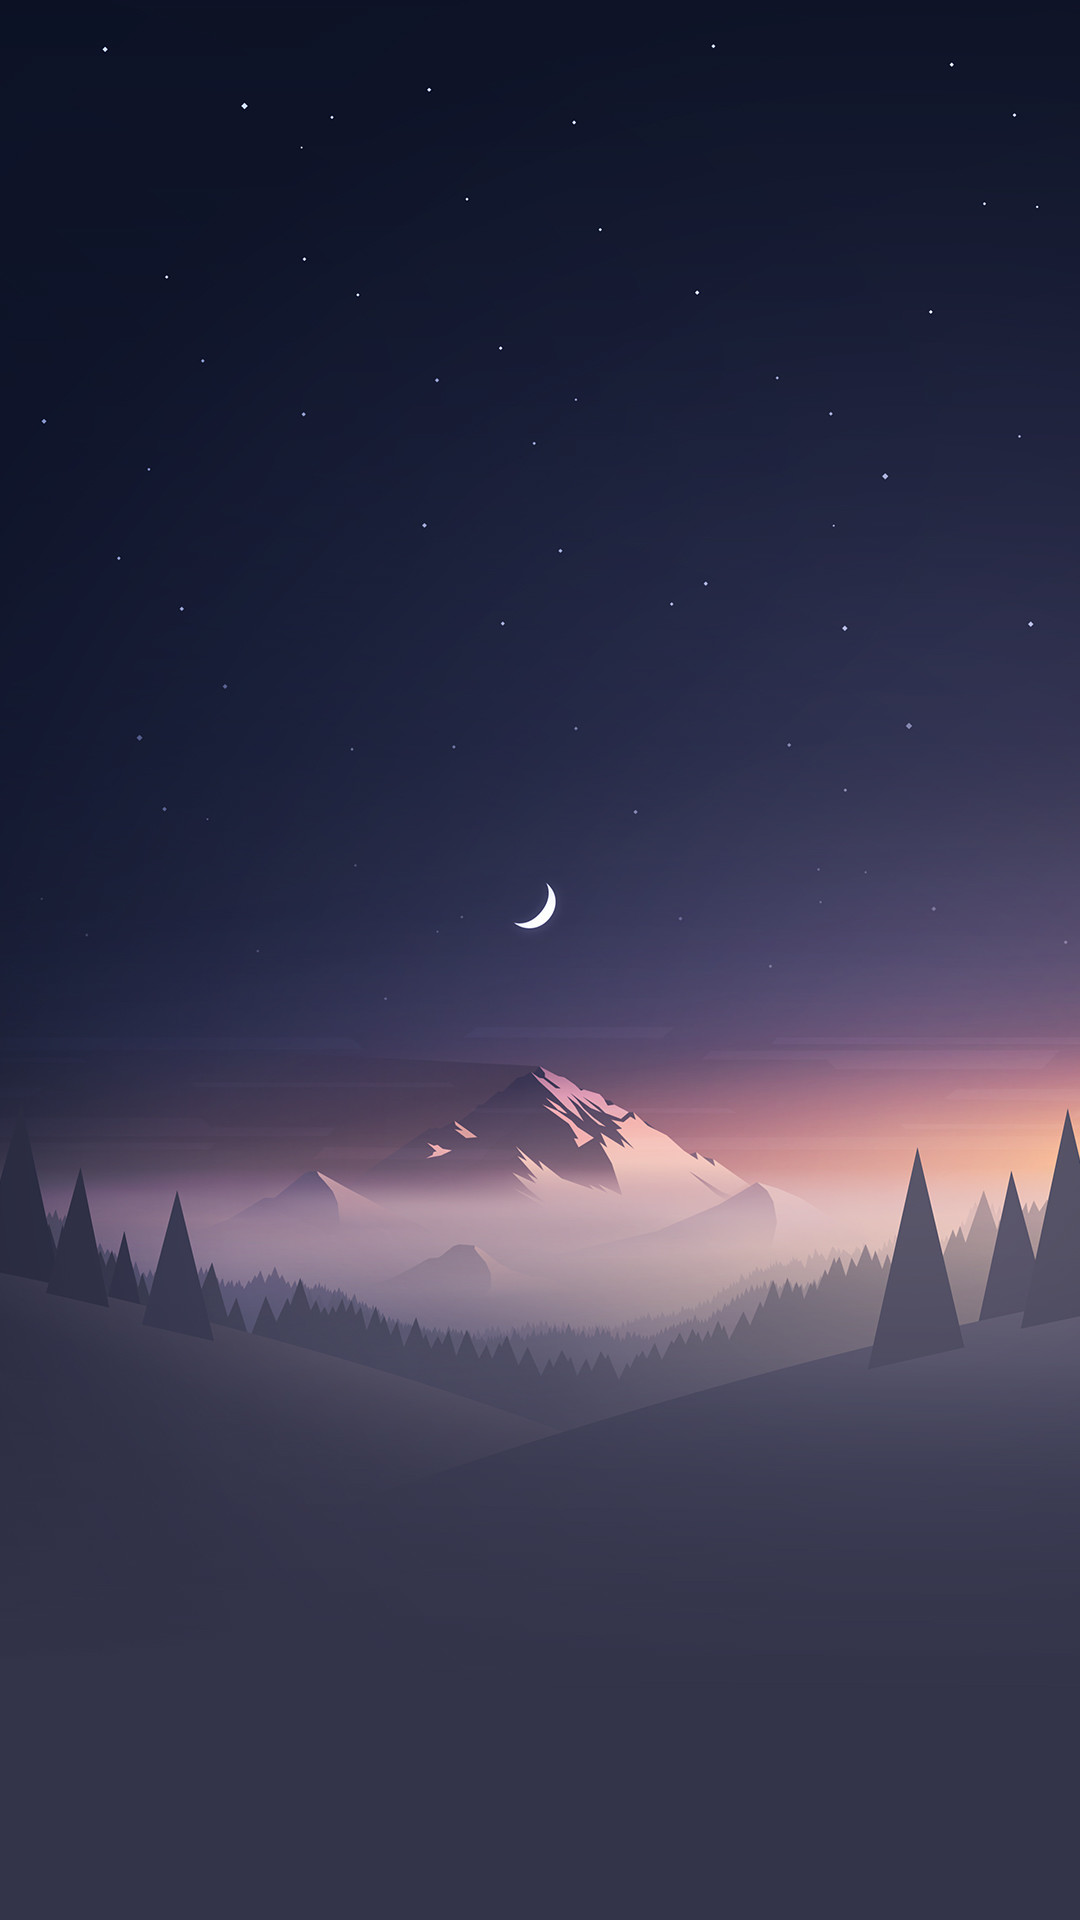 1080x1920 Stars And Moon Winter Mountain Landscape iPhone 6+ HD Wallpaper - http://